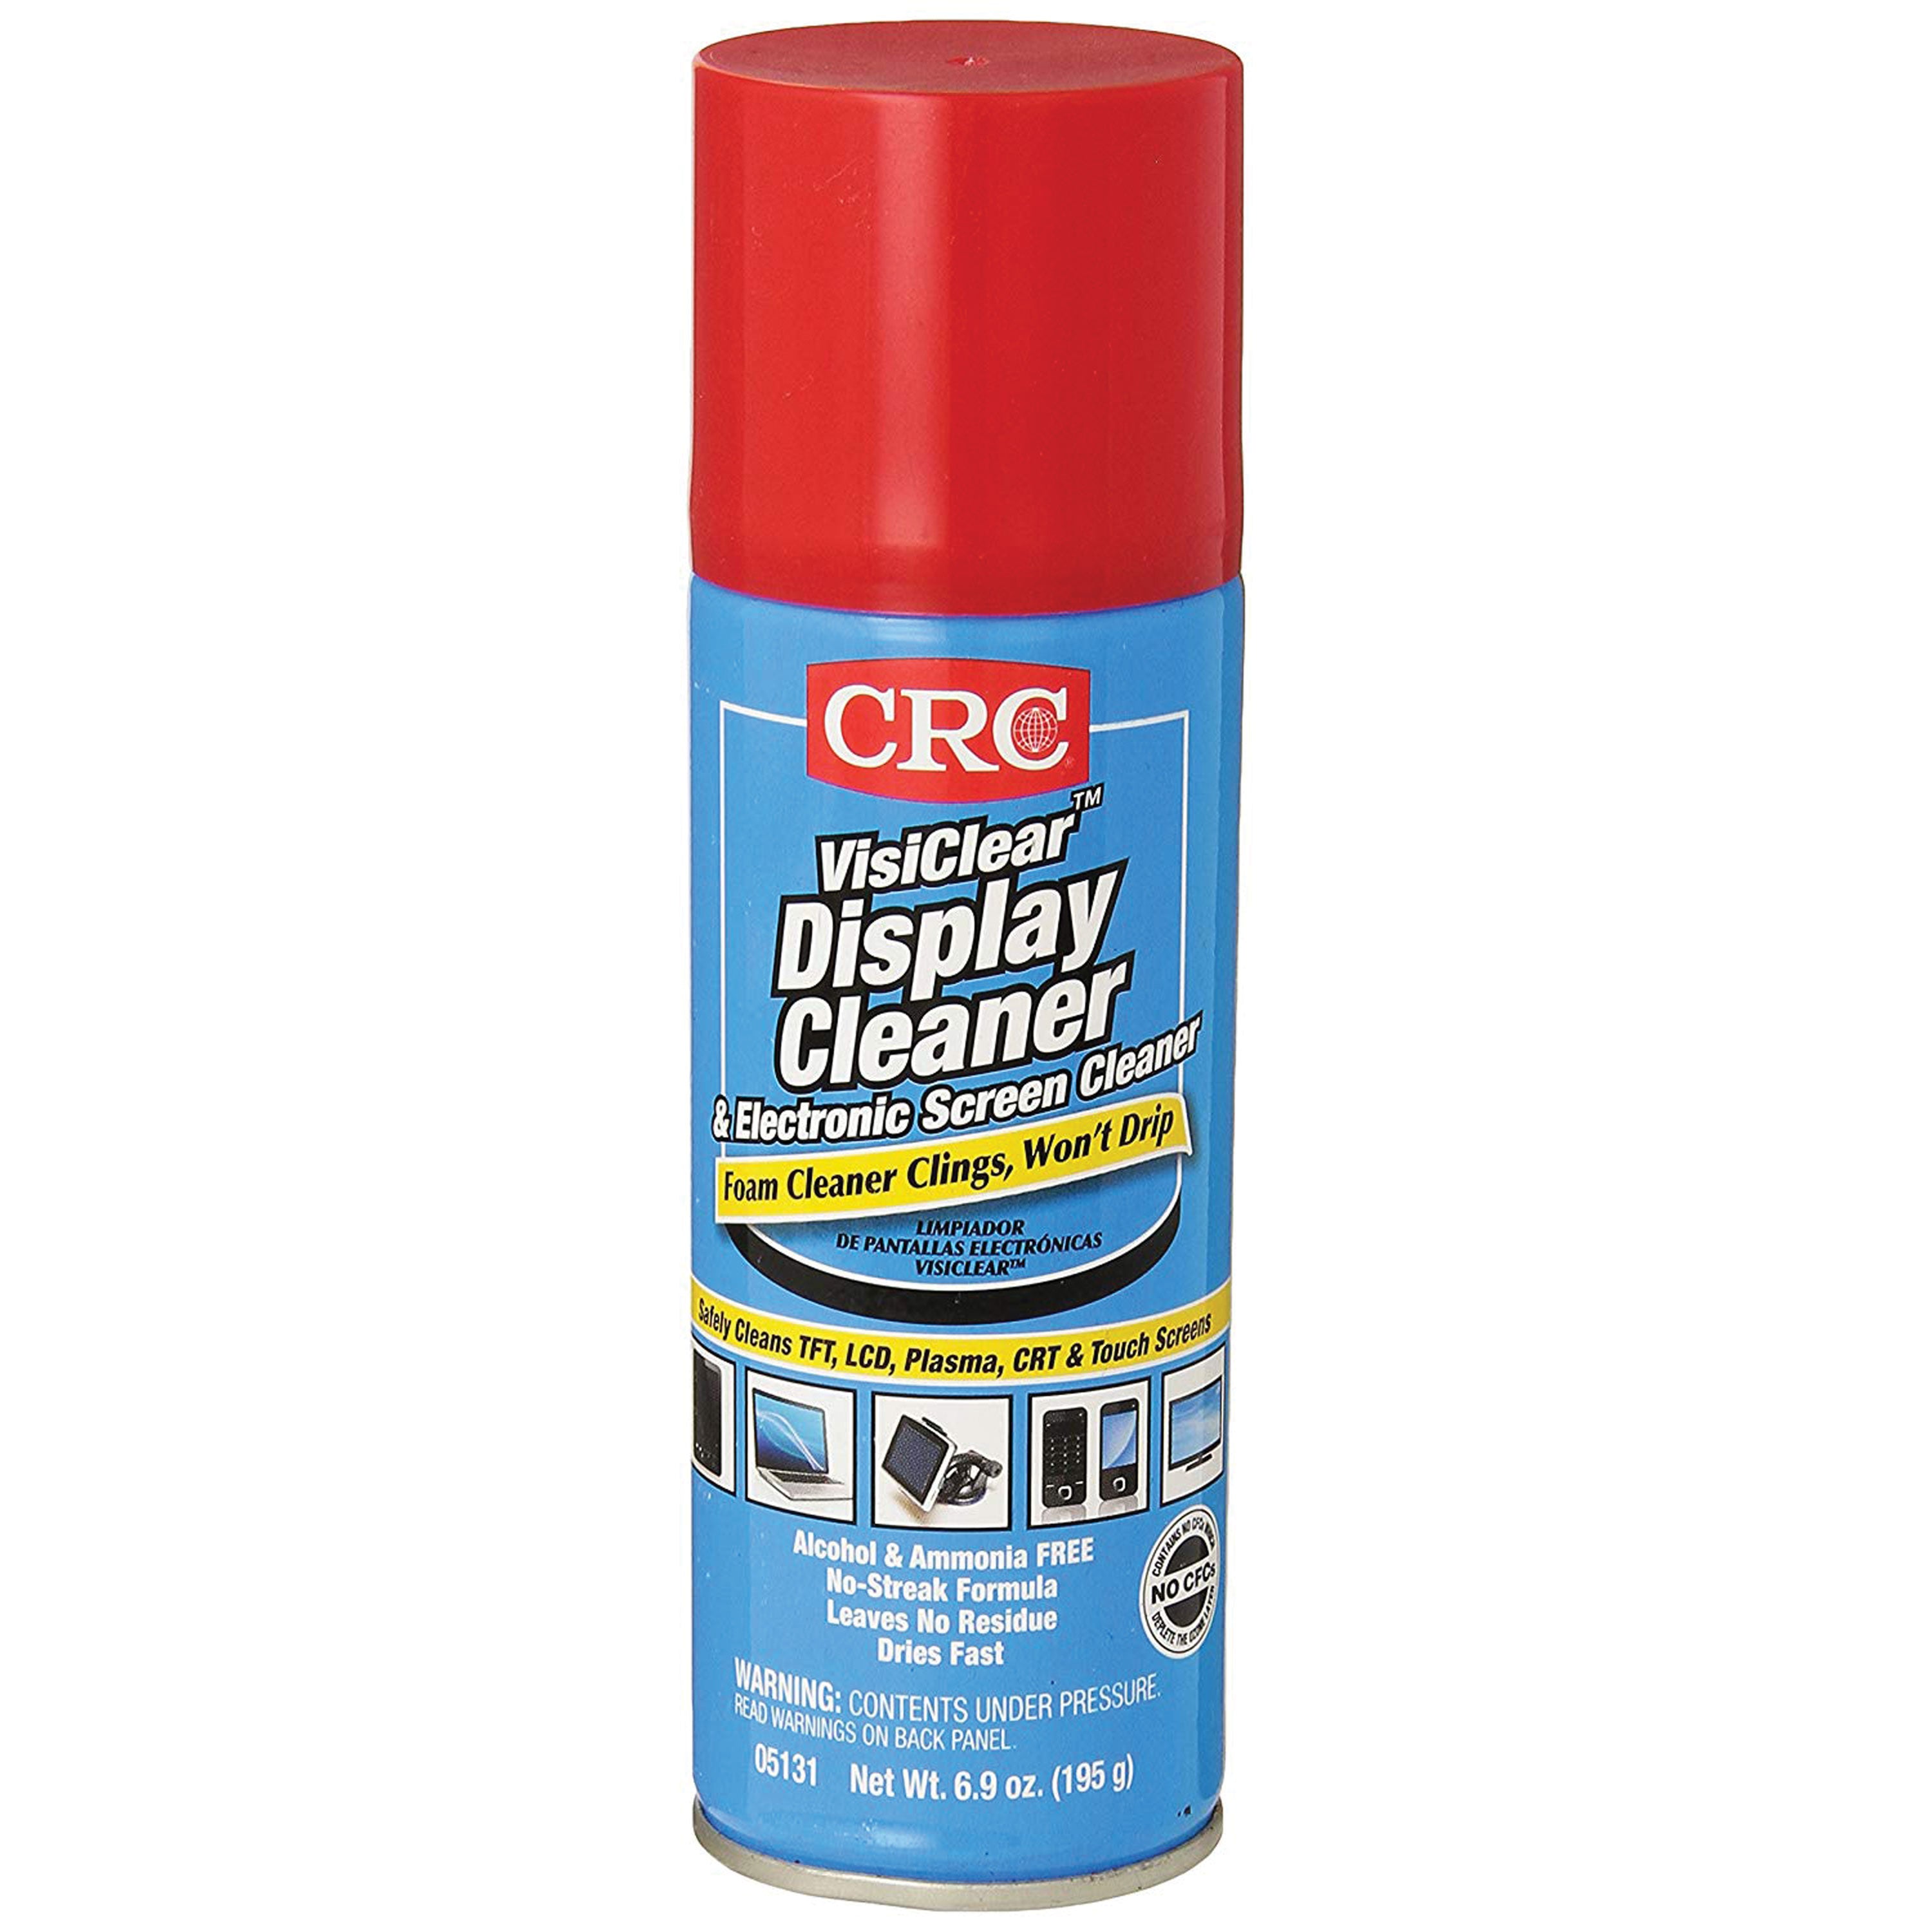 CRC 05131 VisiClear Display and Electronic Screen Cleaner - 6.9 oz.